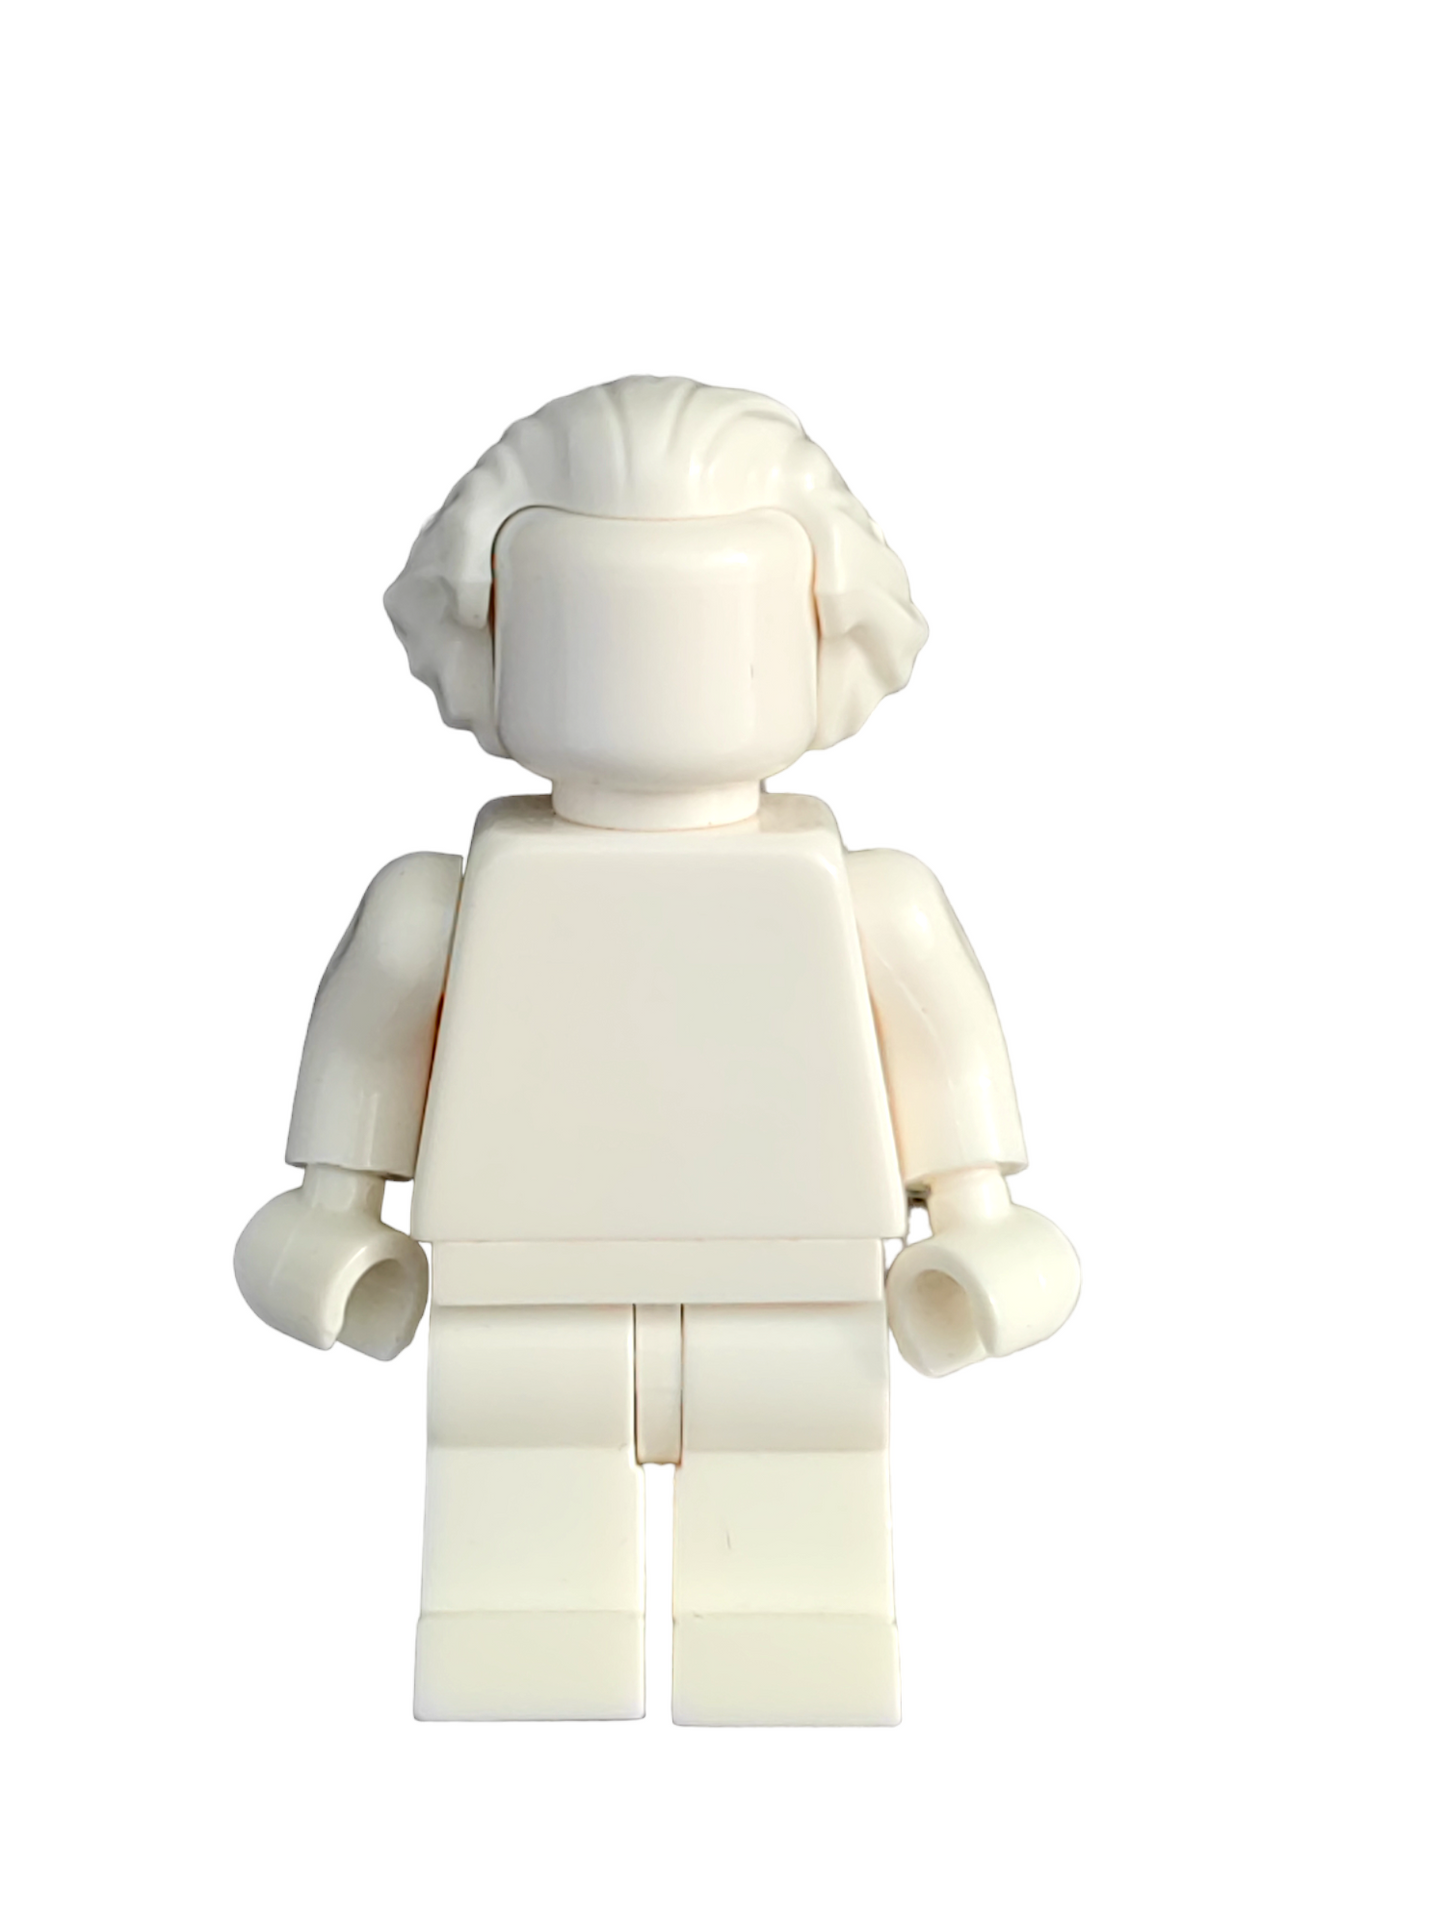 LEGO Wig, White Hair Swept Back with a Peak, and Bushy at the Back - UB1346